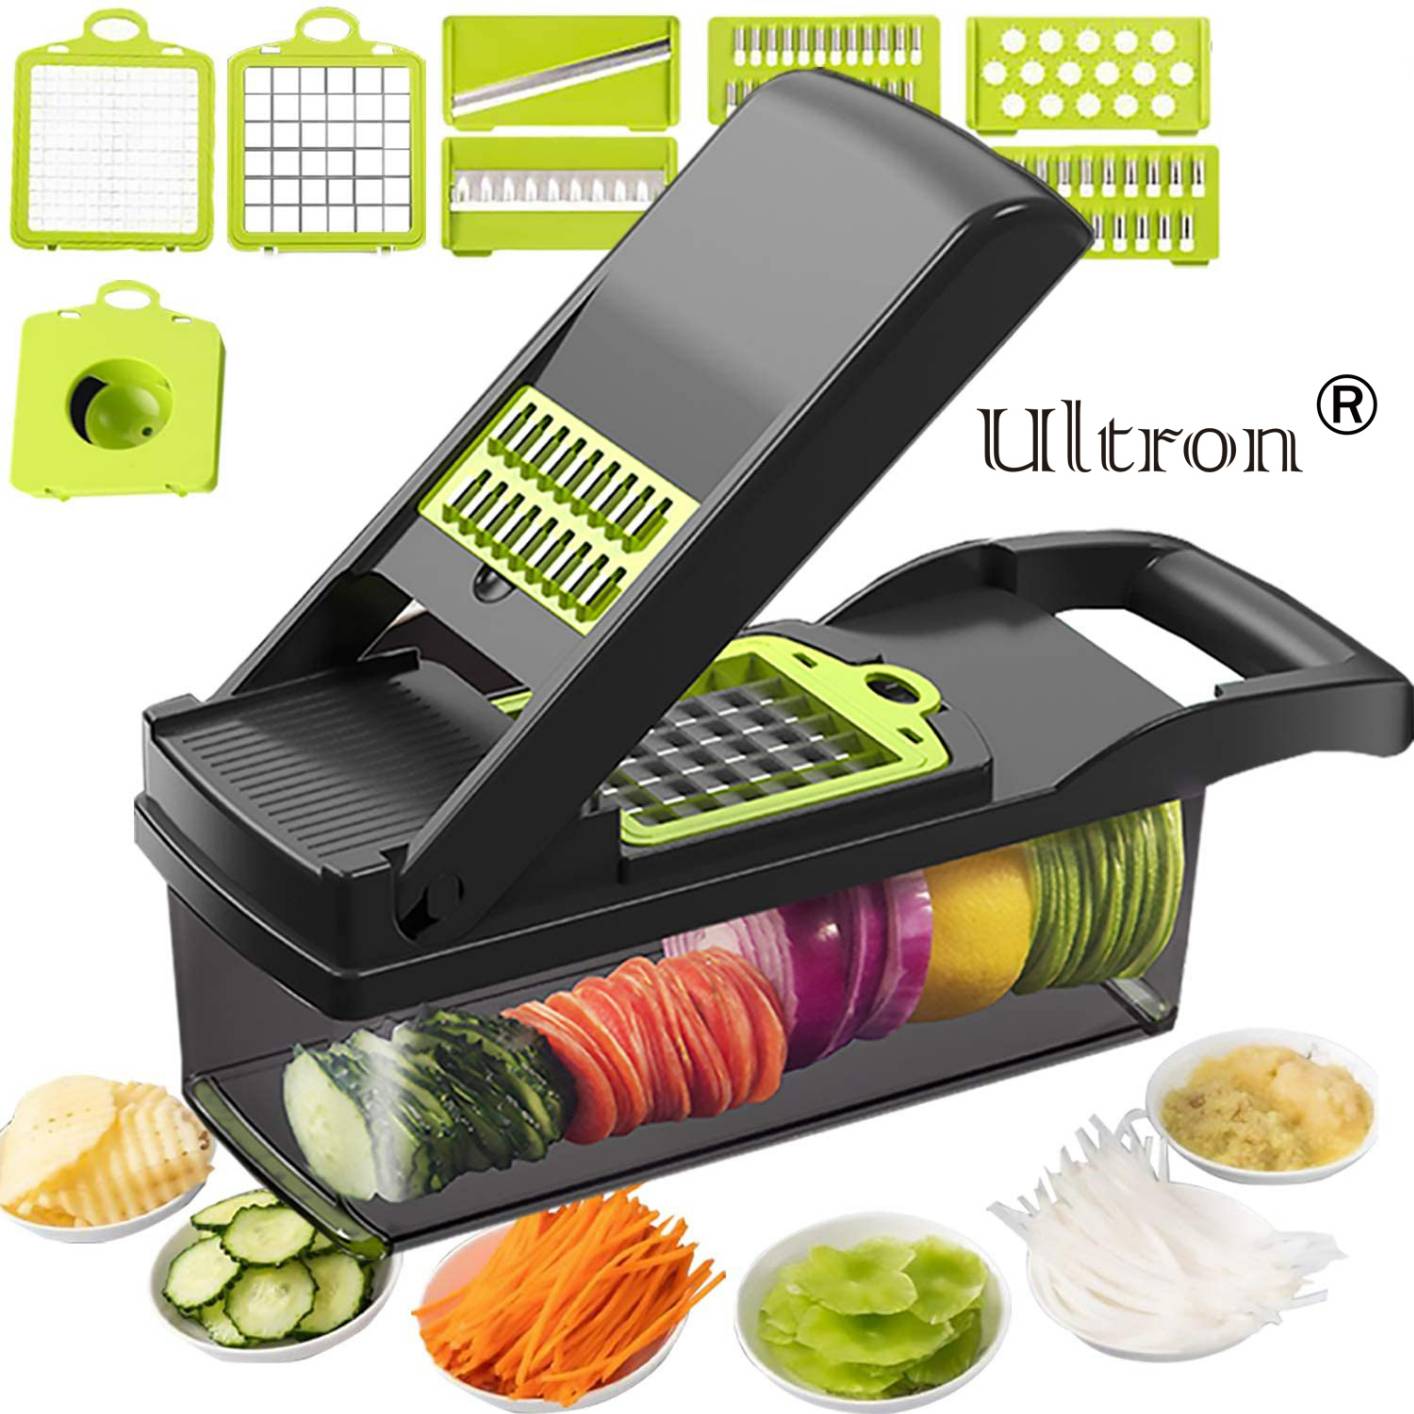 Ultron Vegetable Chopper Mandoline Slicer Cutter Chopper 12 in 1 Interchangeable Blades with Colander Basket and Container by LAGPOUSI Cleaningtool 